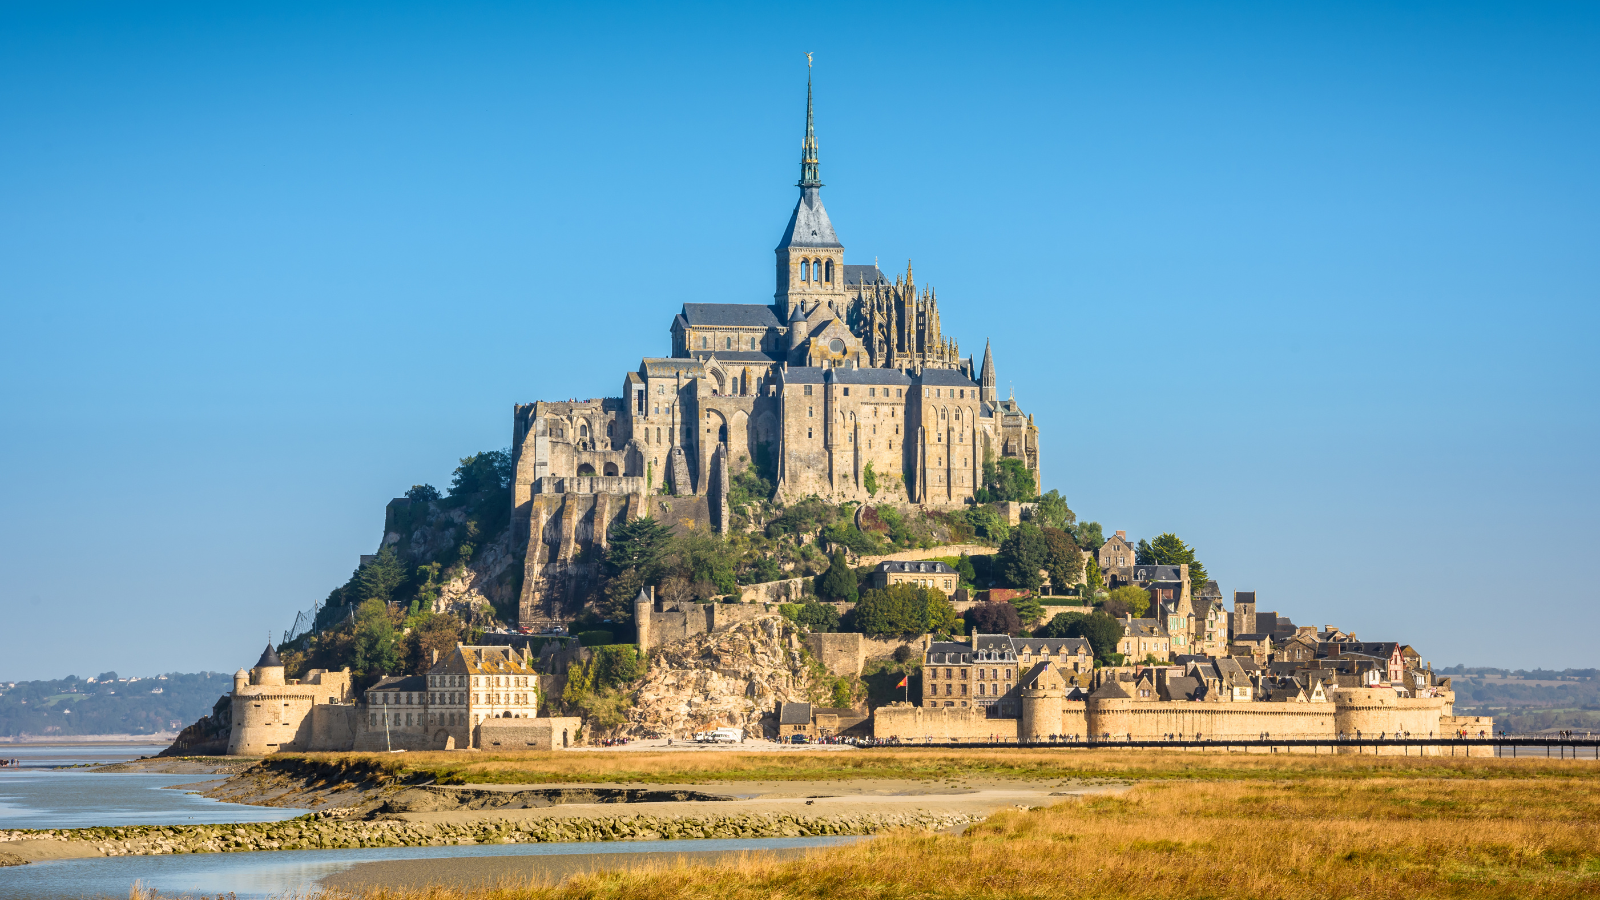 Travel to France in 4 seasons trip in the fall - Mont-Saint-Michel.